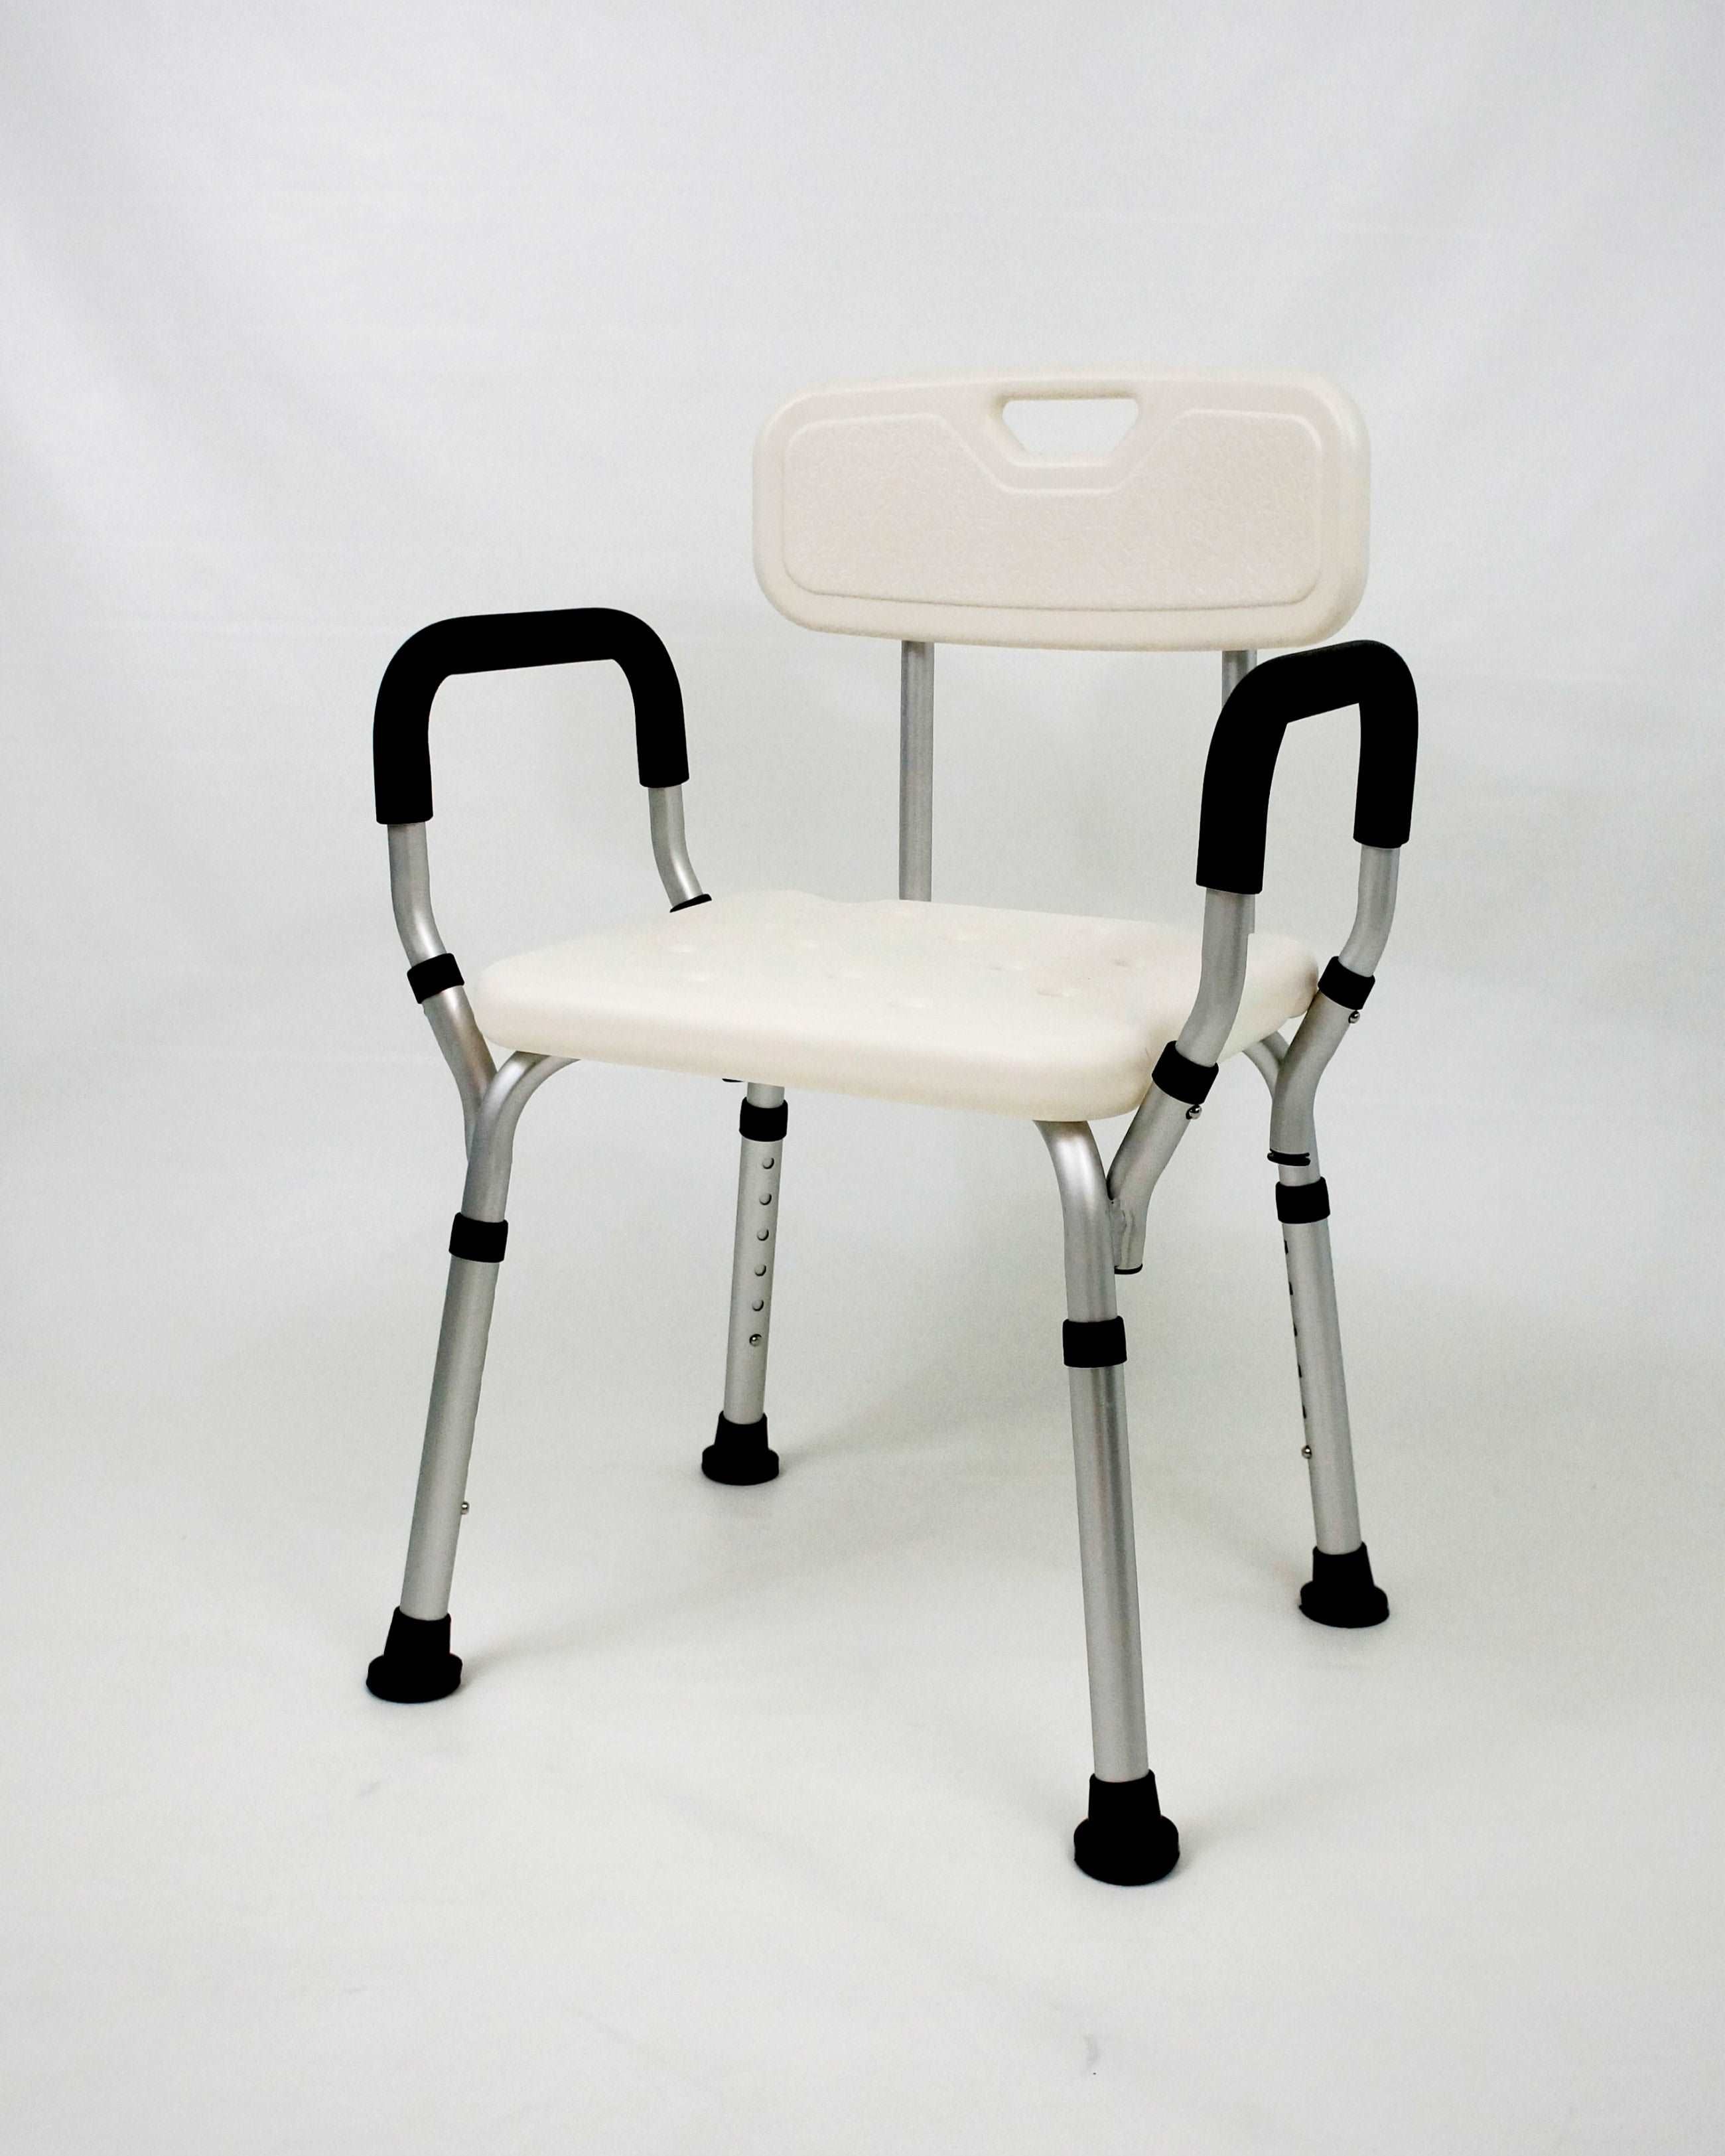 Adjustable Shower Chair With Armrest - Comfortable Mobility Aid for Showering